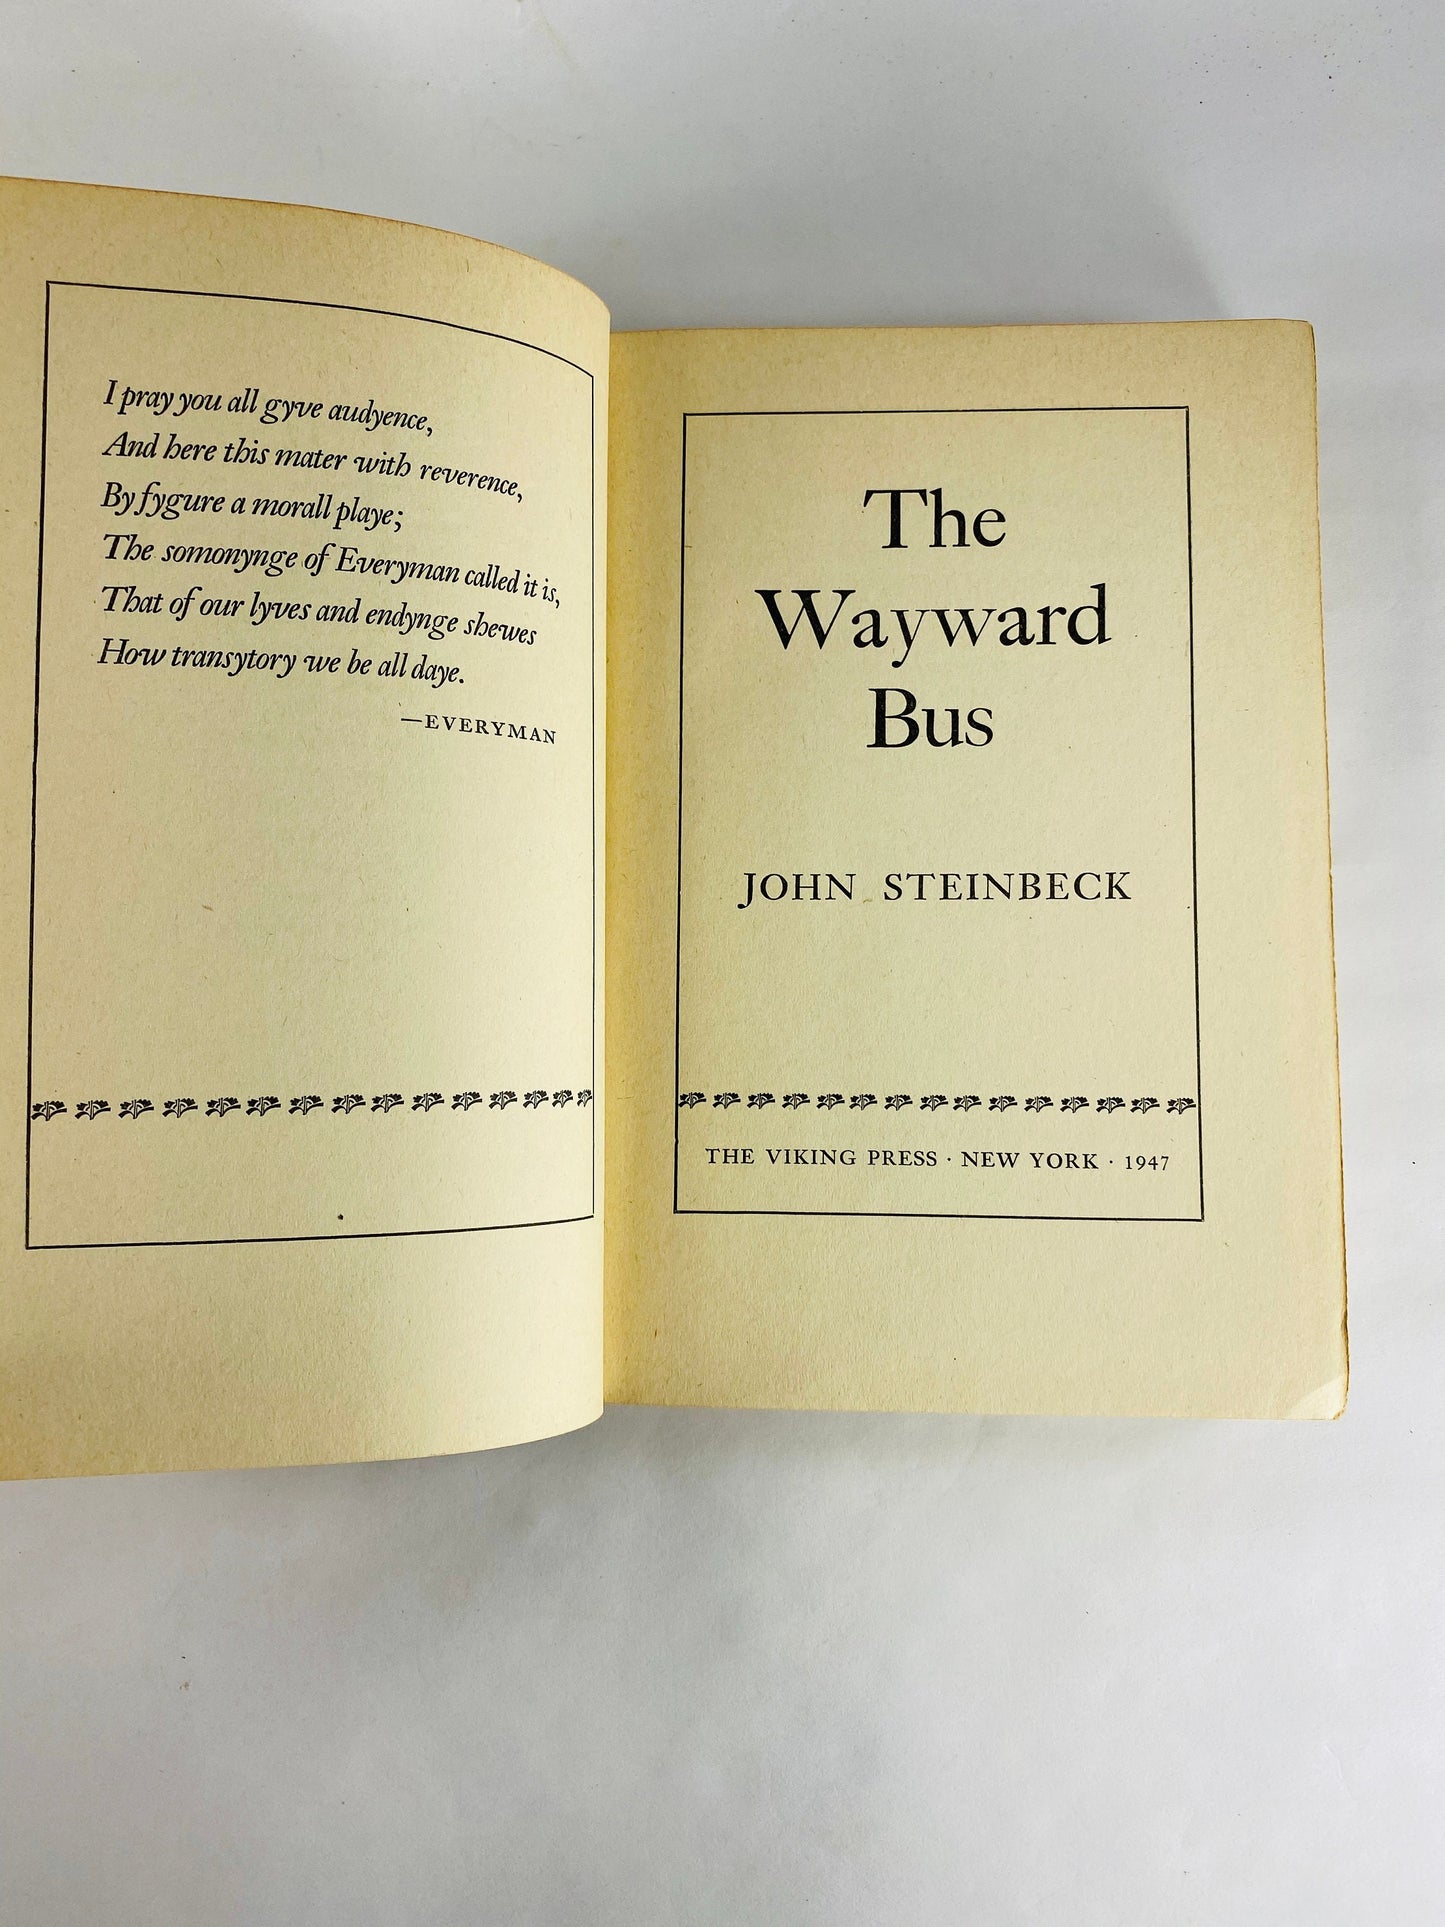 Wayward Bus by John Steinbeck. FIRST EDITION 3rd printing circa 1947. Vintage book lover gift. VG- Condition. Pulitzer Prize